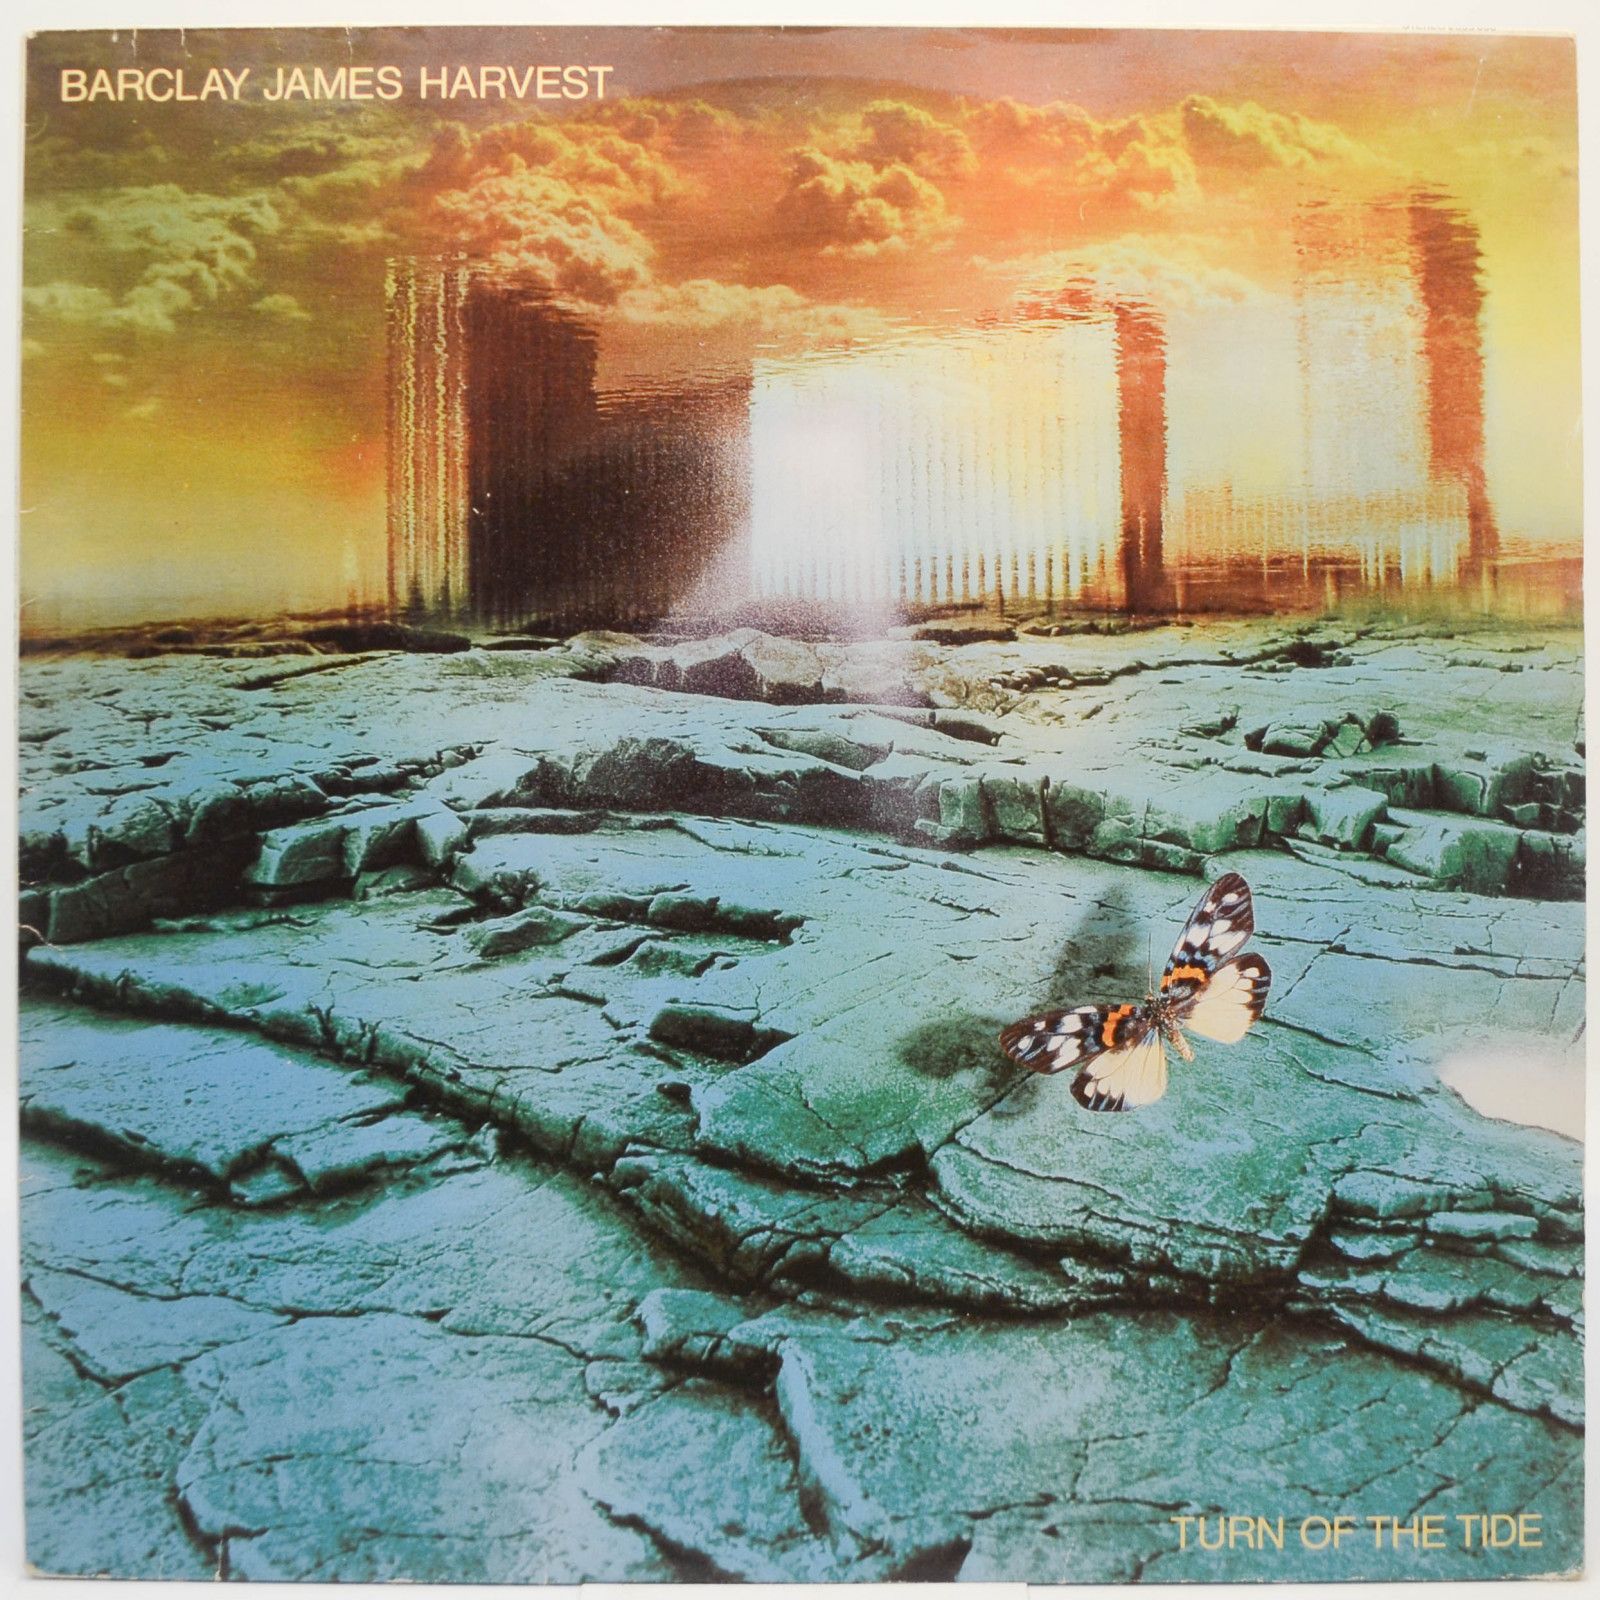 Barclay James Harvest — Turn Of The Tide, 1981